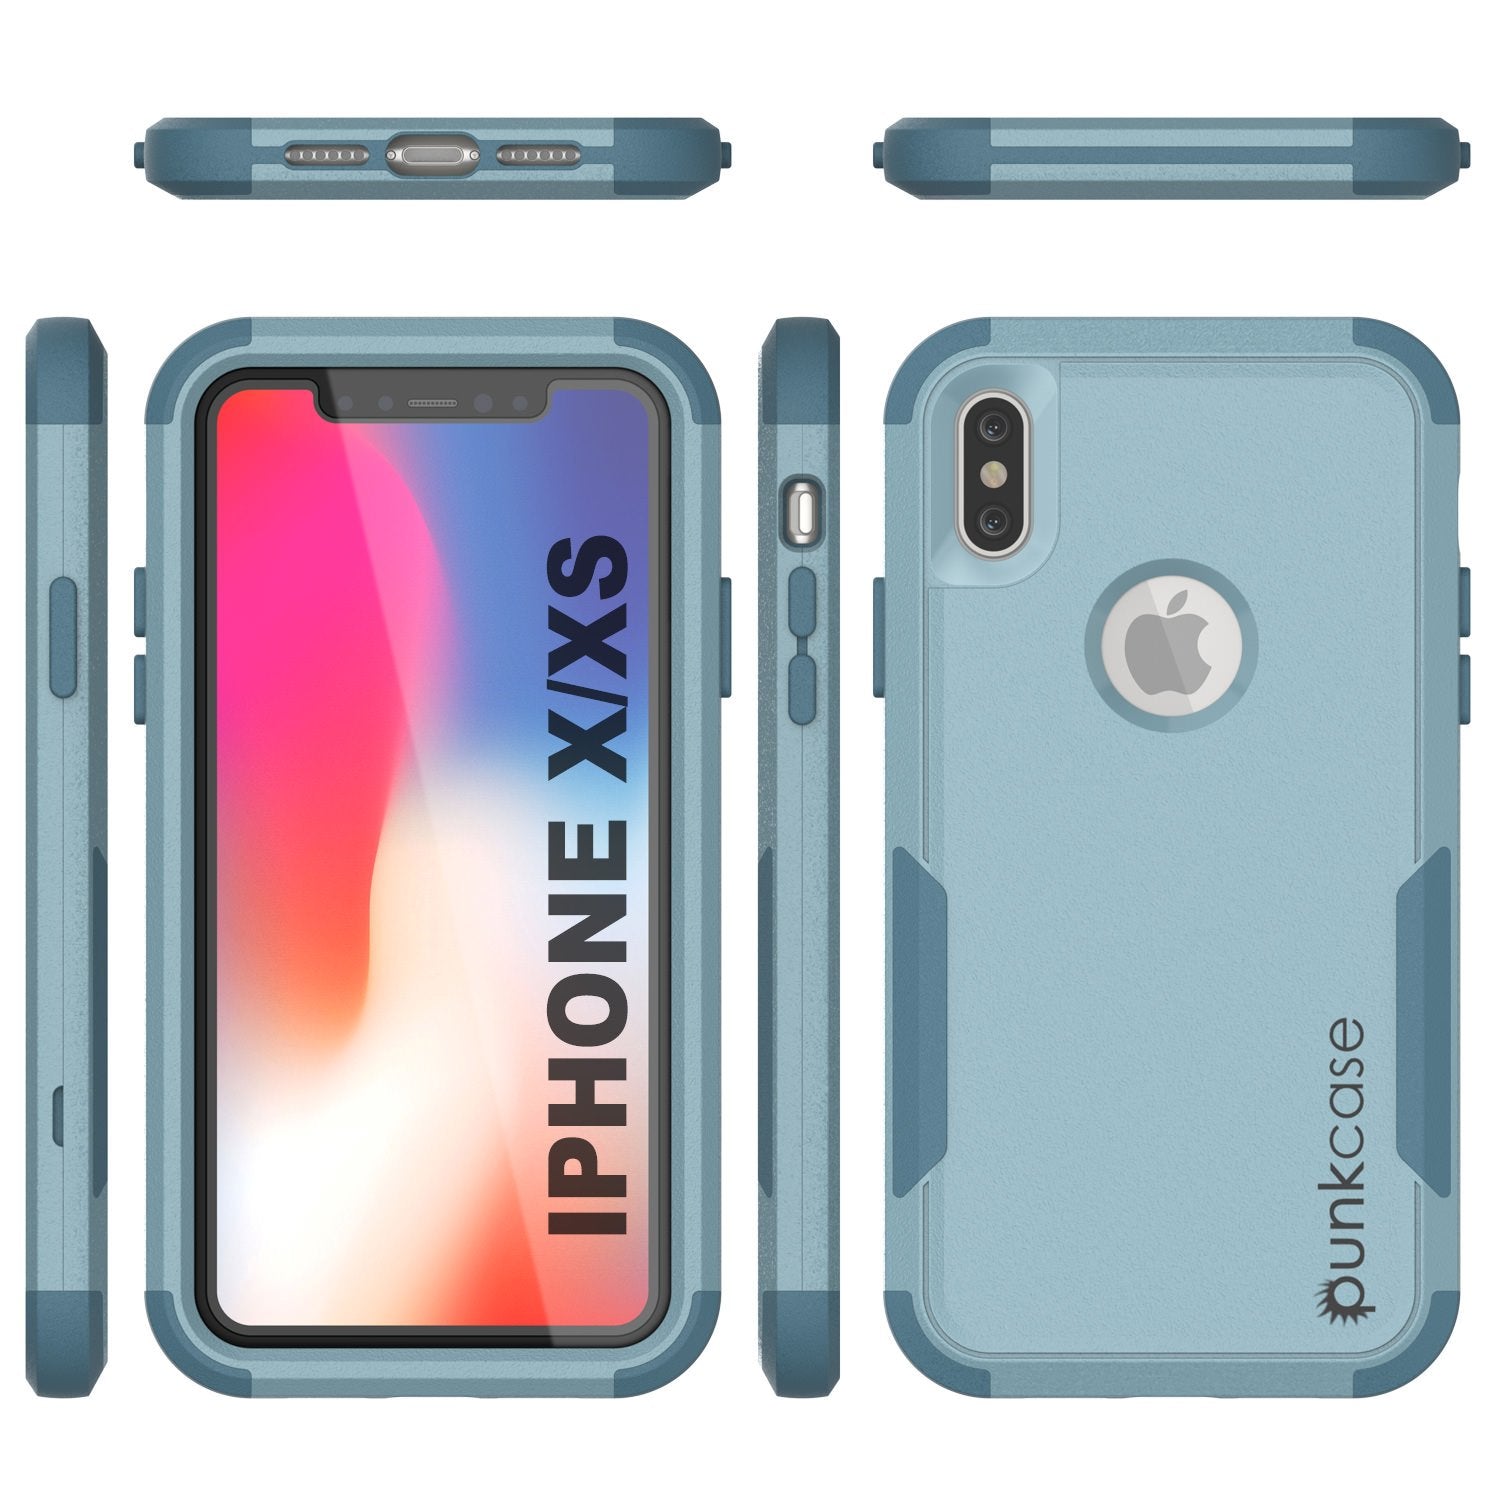 Punkcase for iPhone XS Belt Clip Multilayer Holster Case [Patron Series] [Mint]